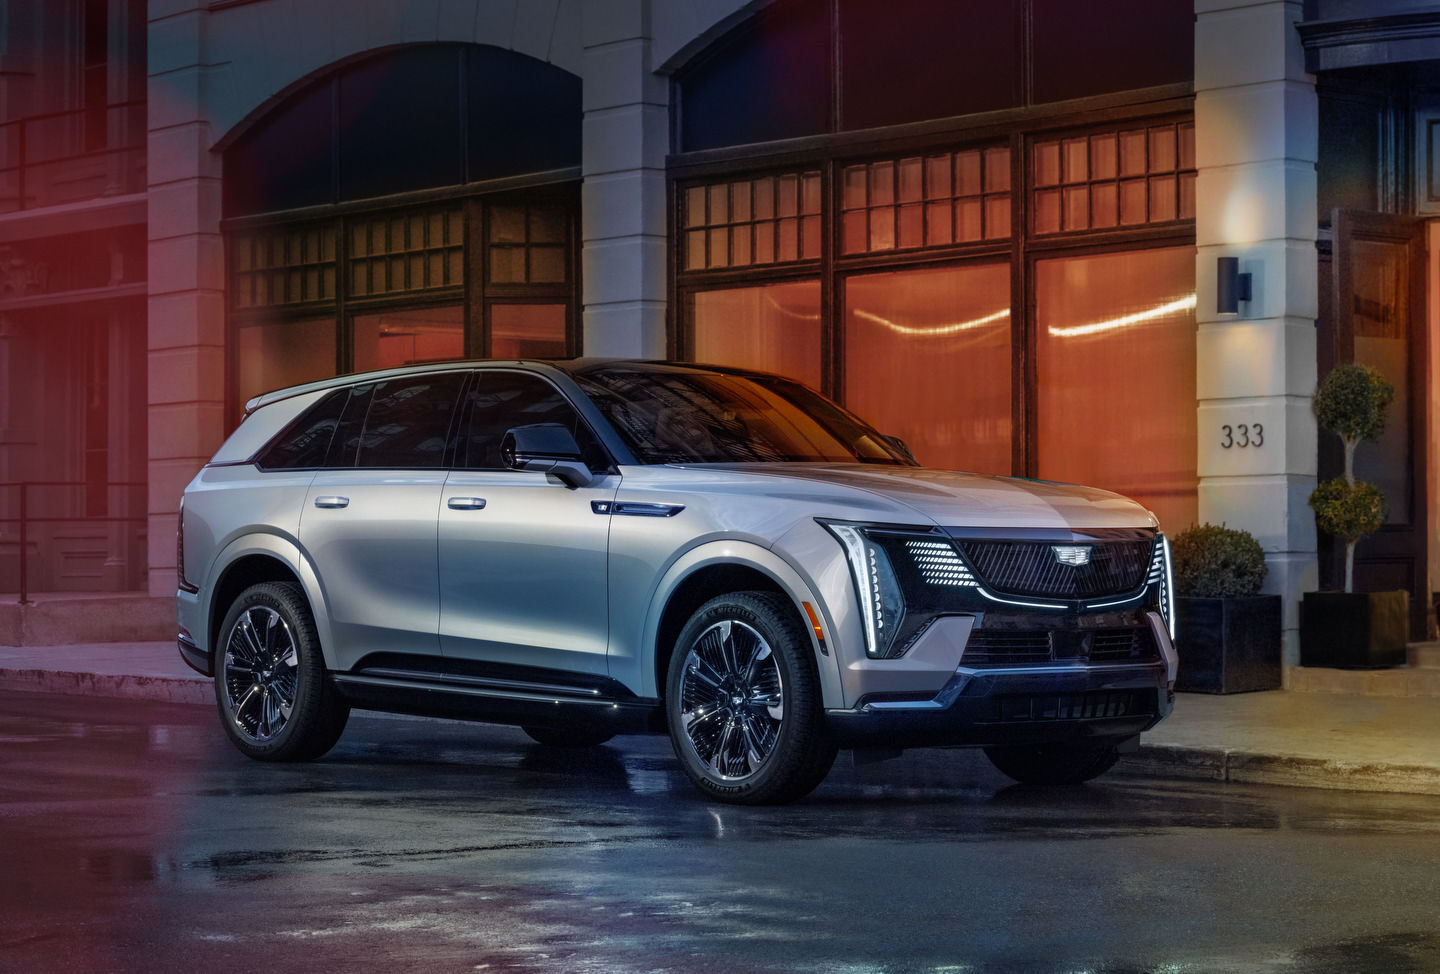 Cadillac's Electric Evolution: Introducing the 2025 ESCALADE IQ